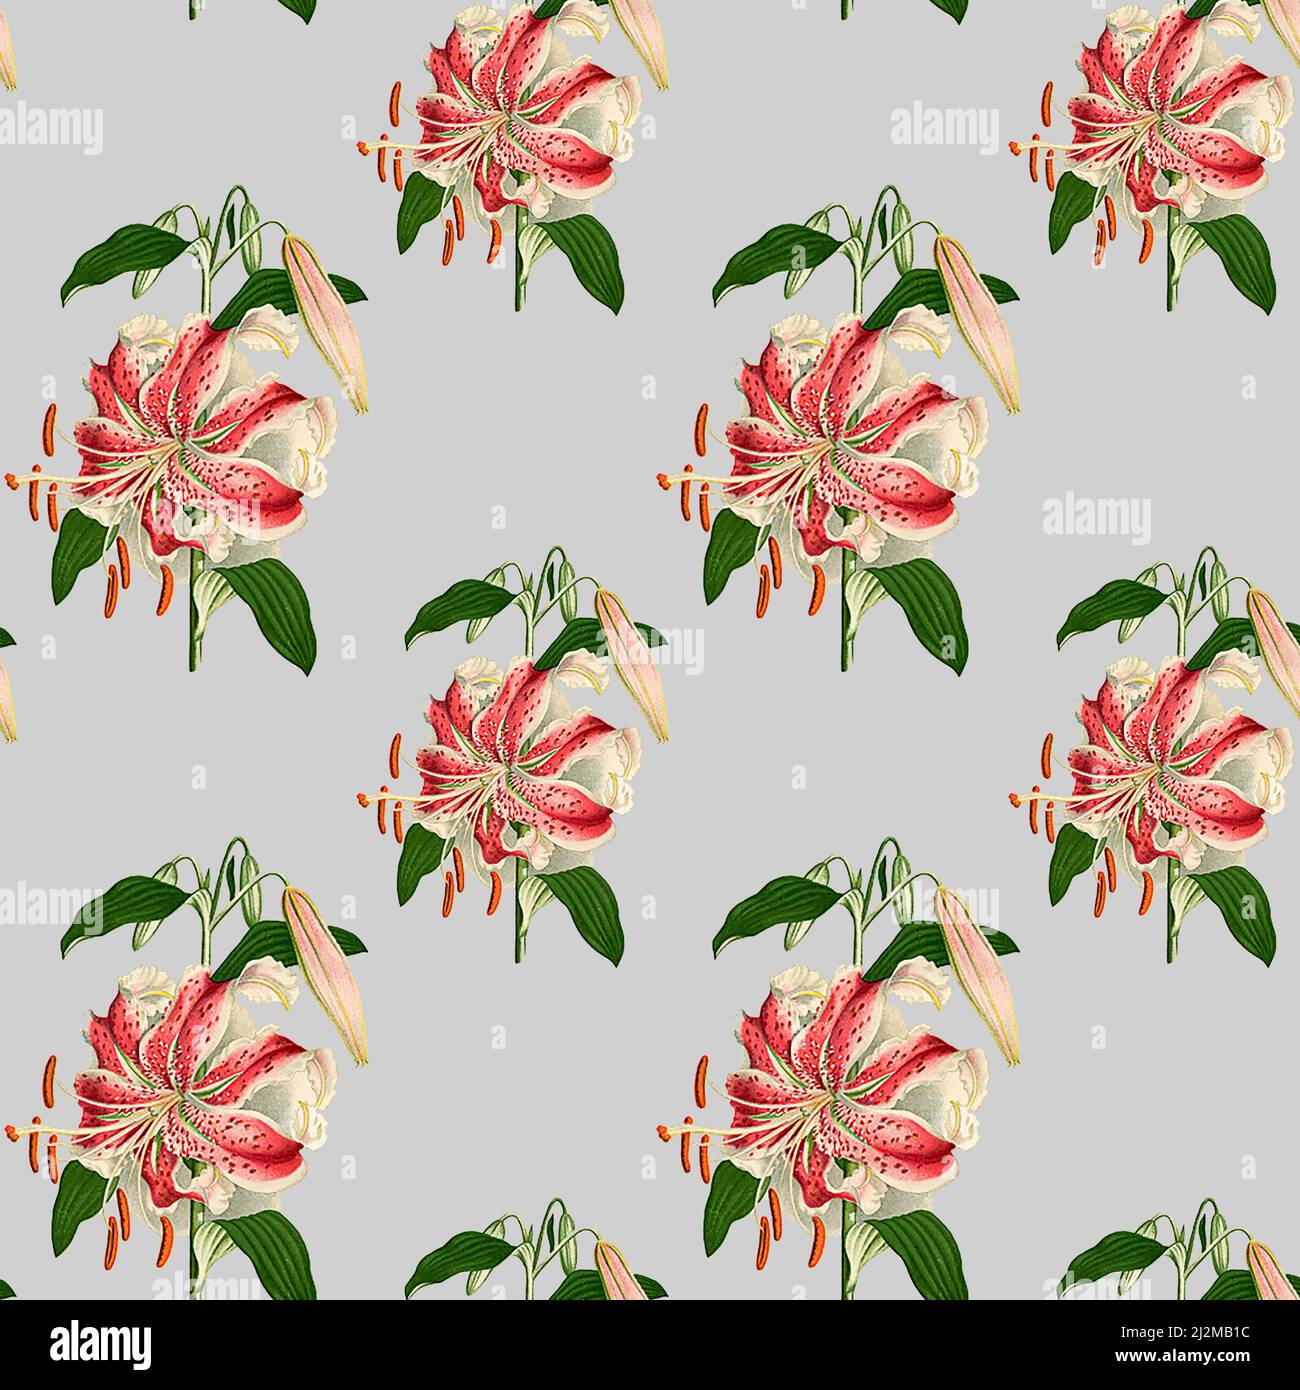 Lily flowers pattern background a seamless pattern with light gray background and vintage lillies. Stock Photo